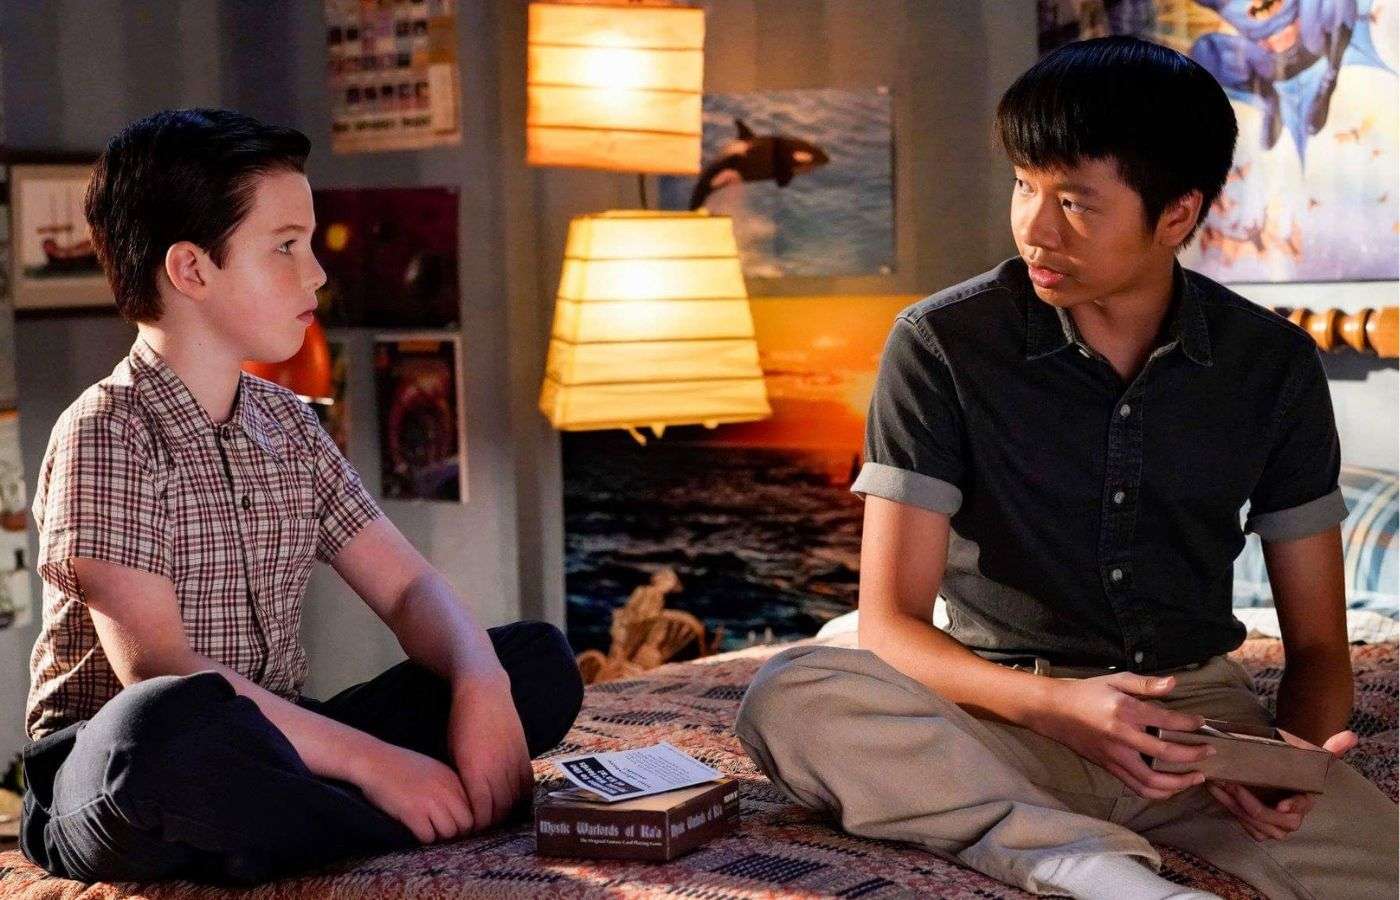 Sheldon and Tam sitting on Sheldon's bed in Young Sheldon.